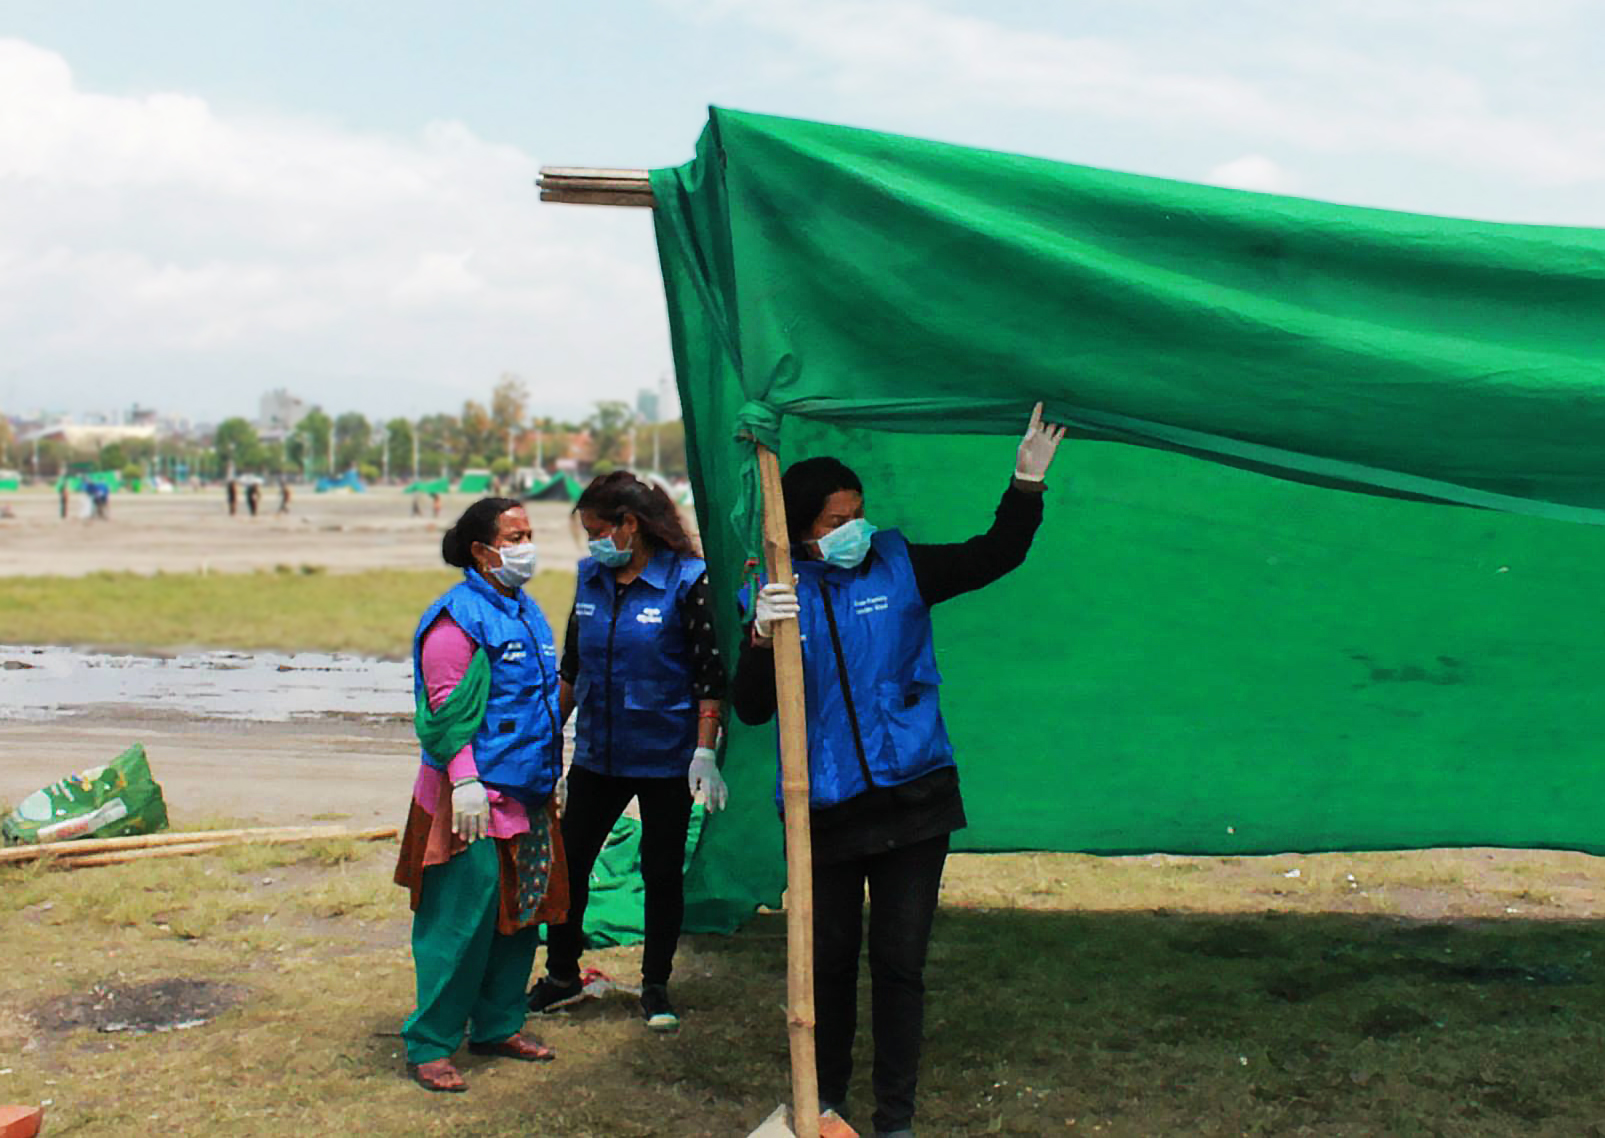 Rise Nepal helps collect tents and rising tarps for shelter